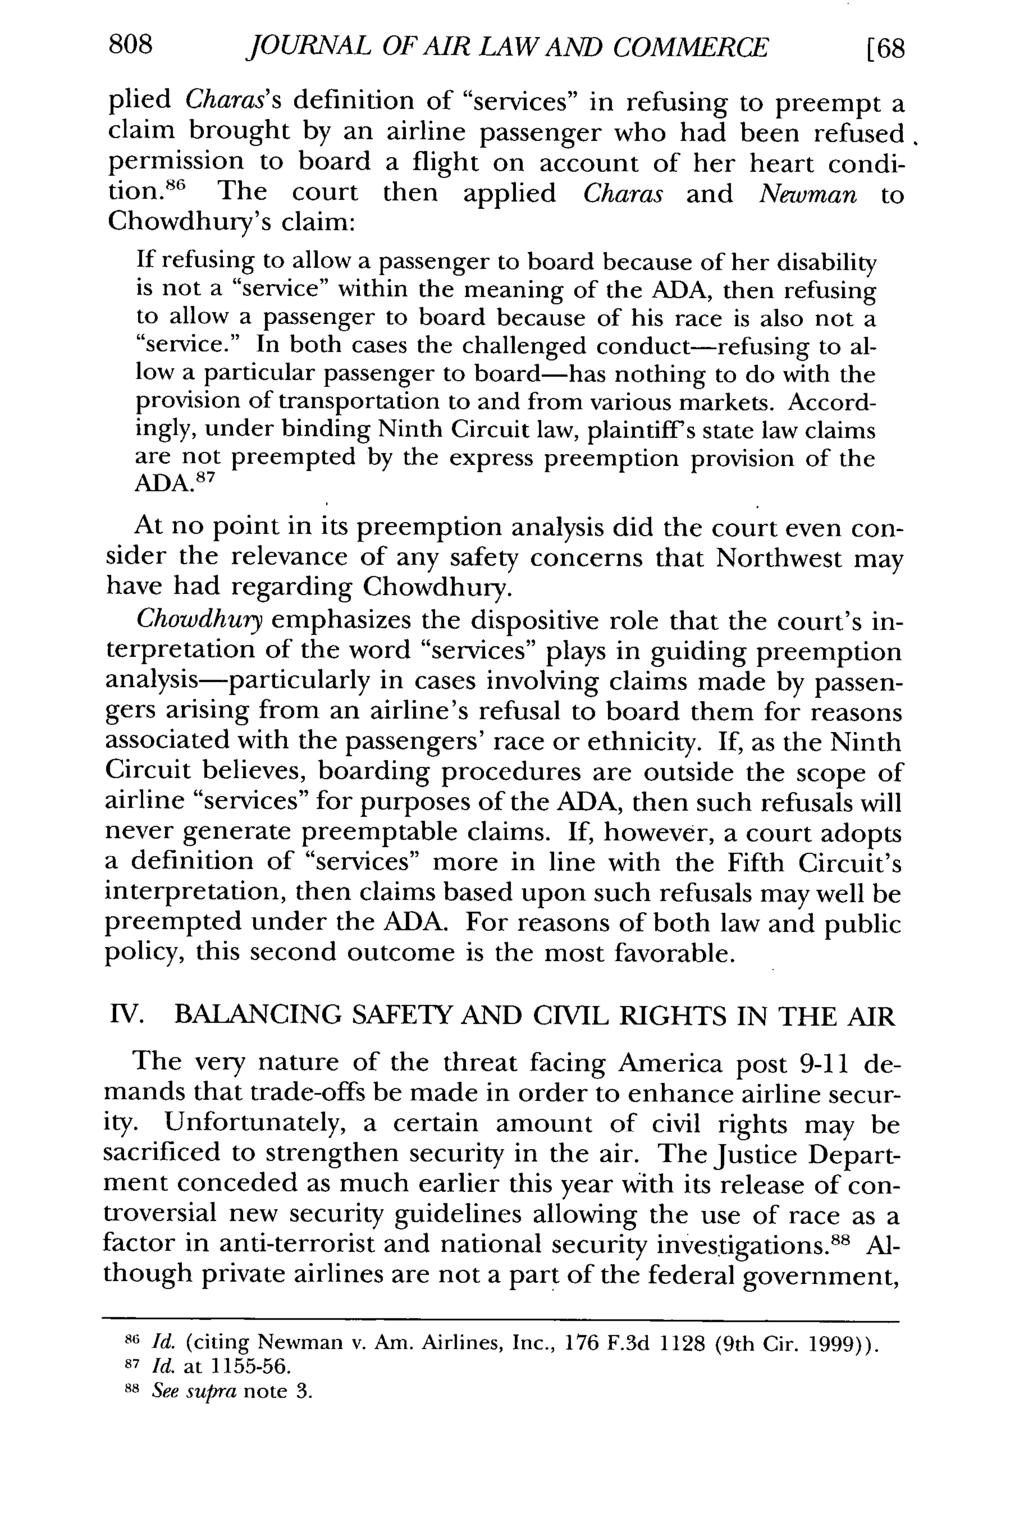 808 JOURNAL OF AIR LAW AND COMMERCE plied Charas's definition of "services" in refusing to preempt a claim brought by an airline passenger who had been refused.